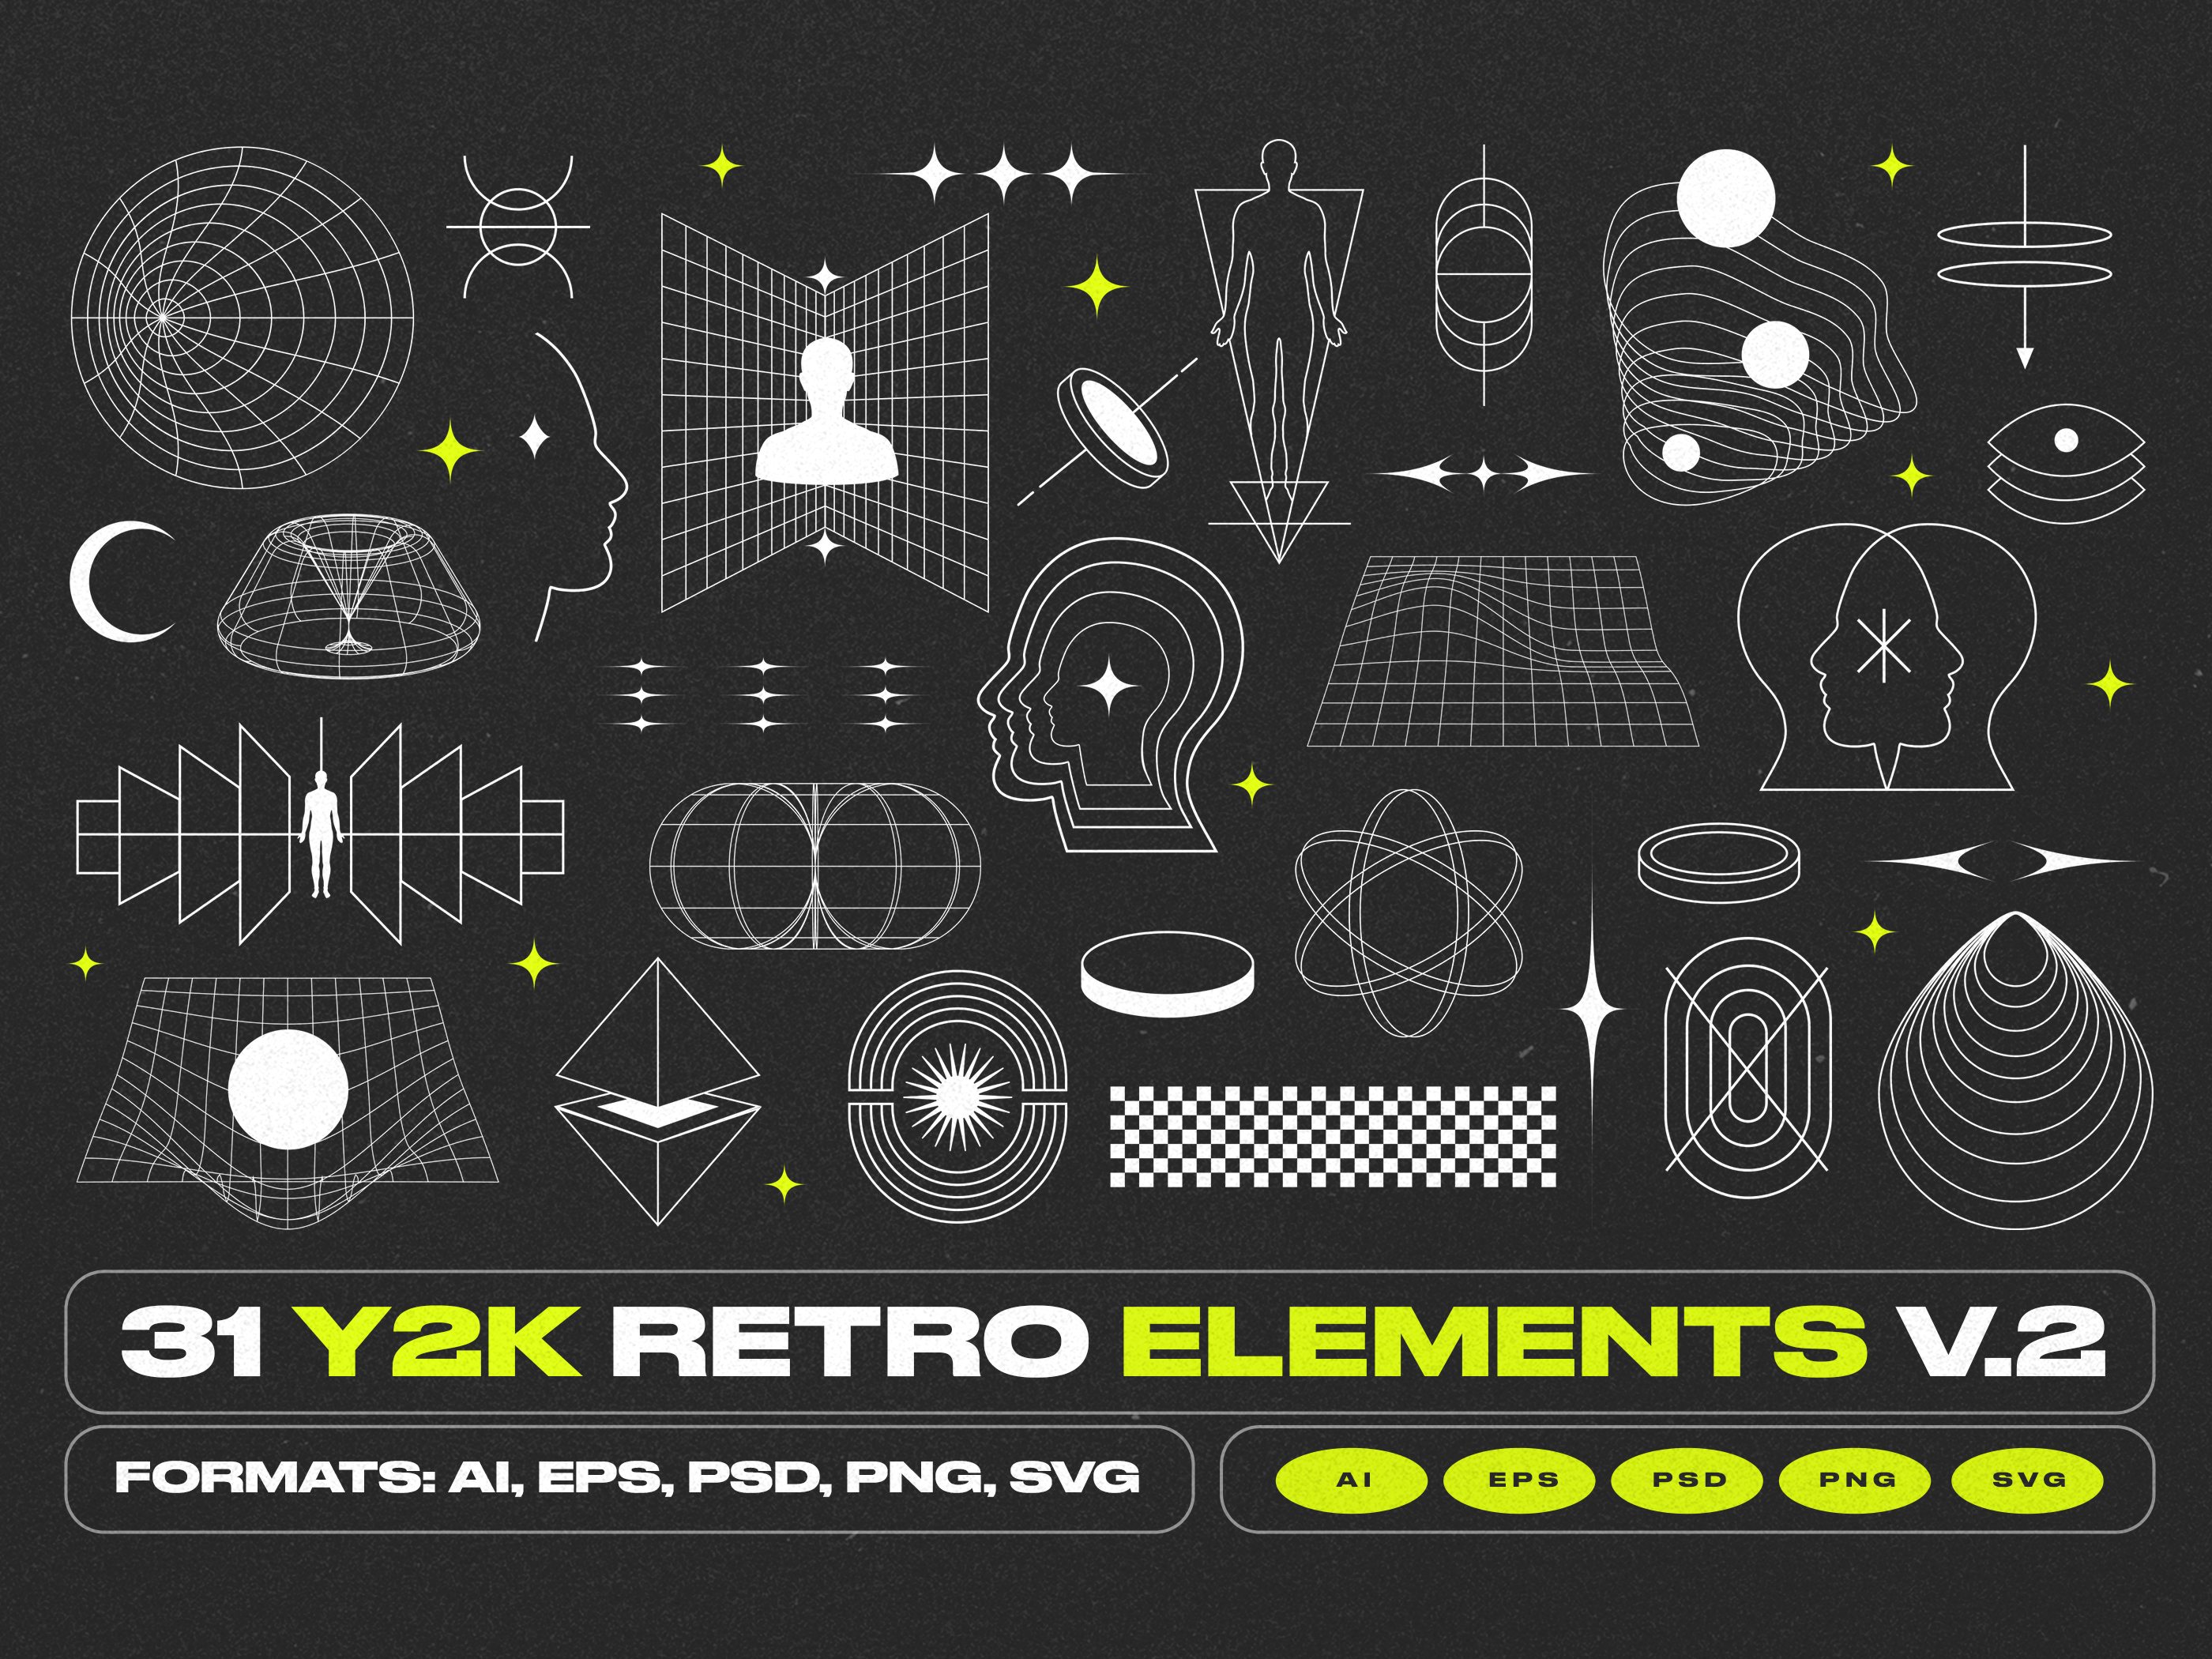 y2k retro elements. Abstract shapes and symbols for futuristic